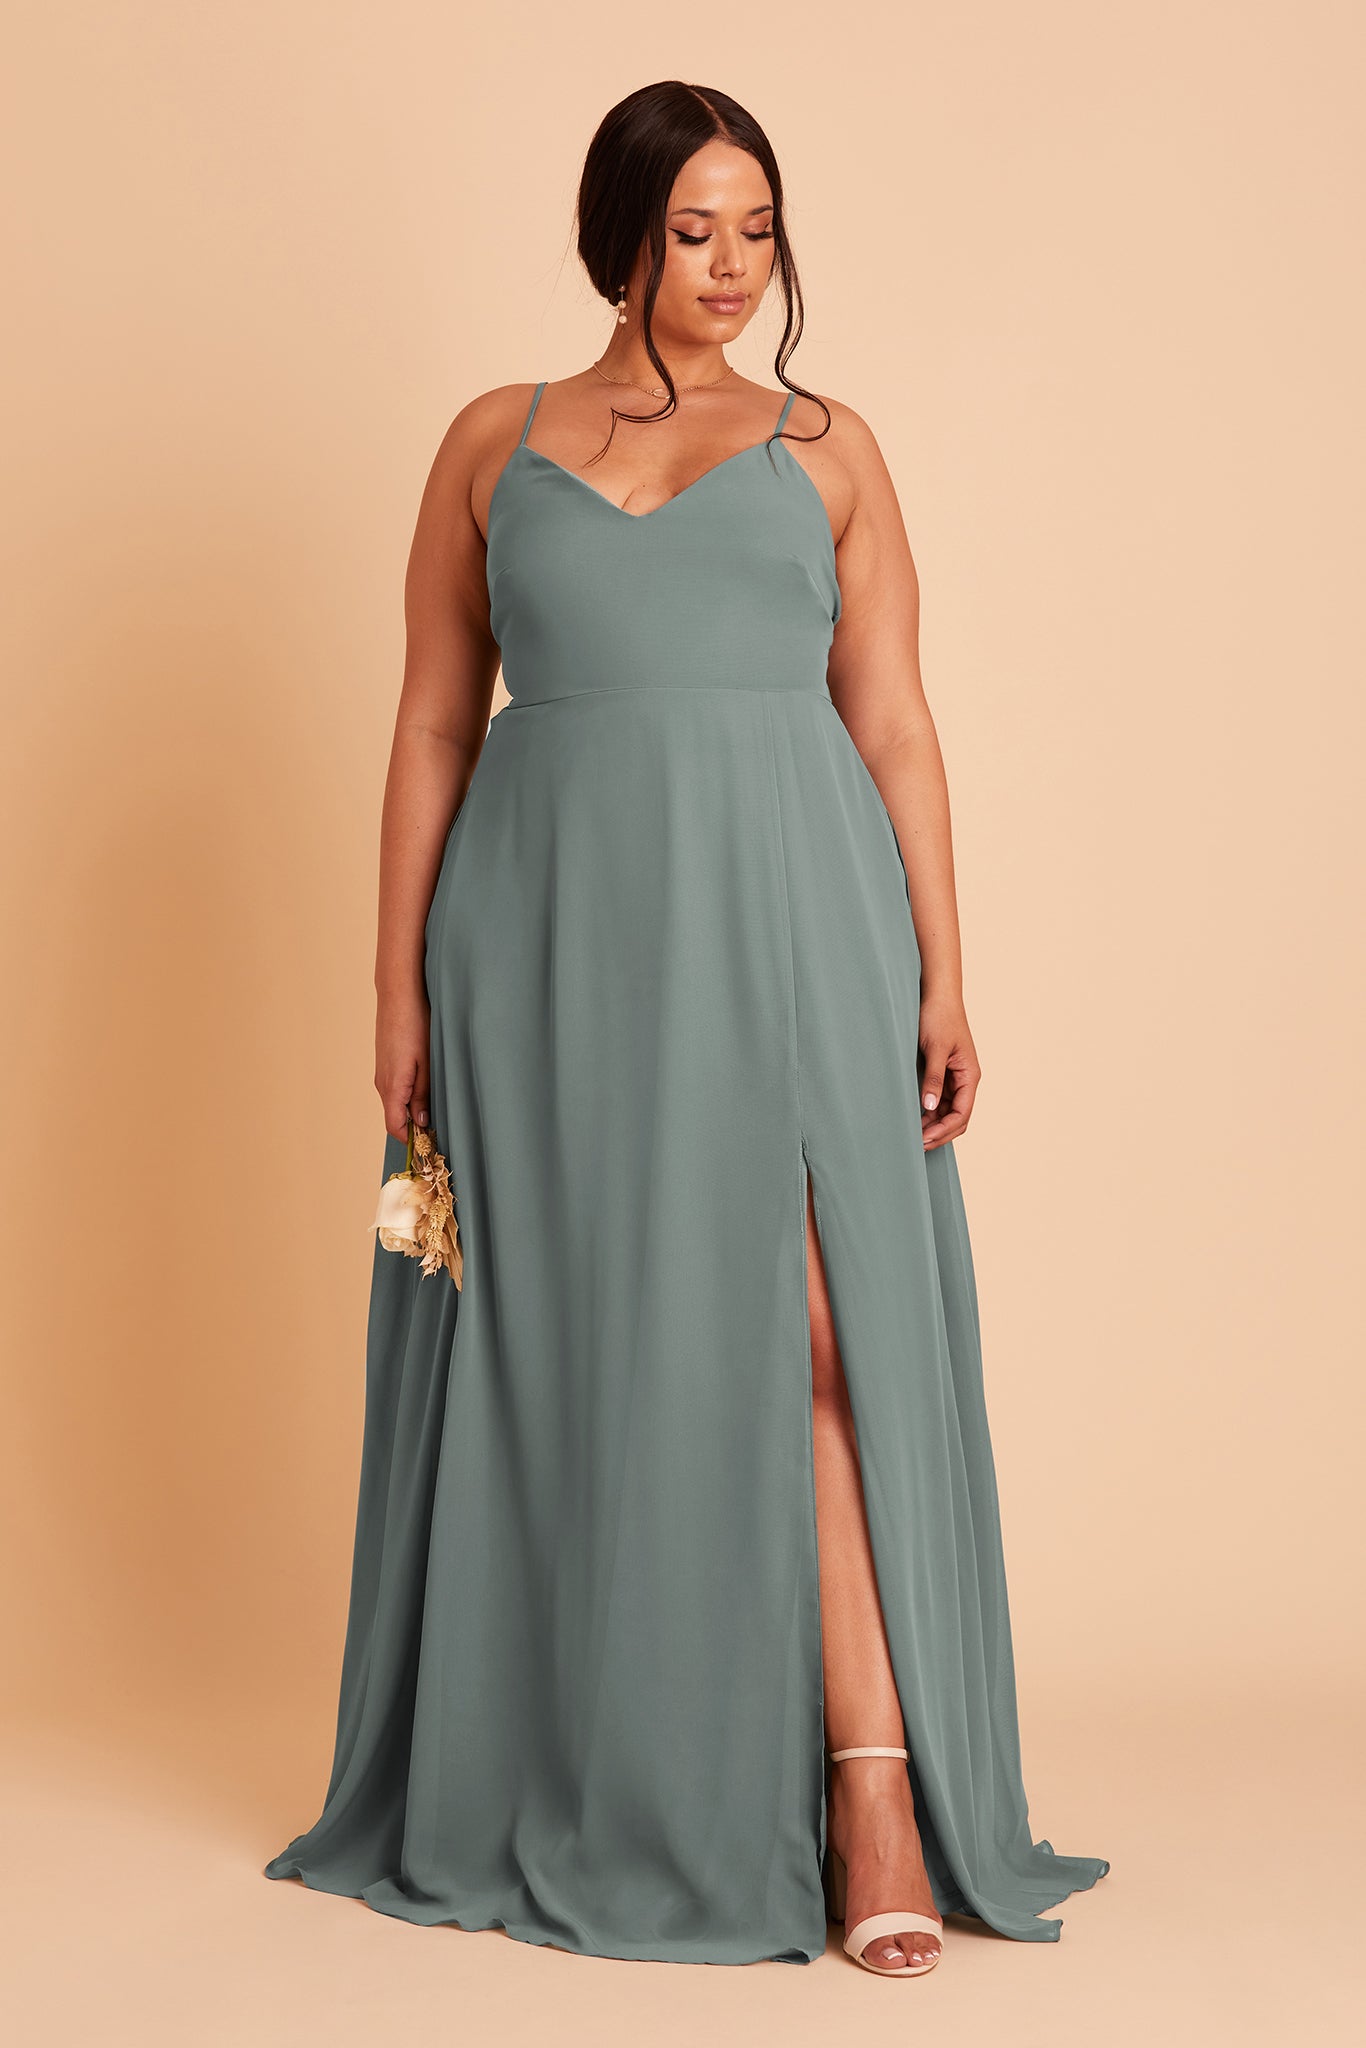 Adelle plus size bridesmaid dress with slit in sea glass green chiffon by Birdy Grey, front view